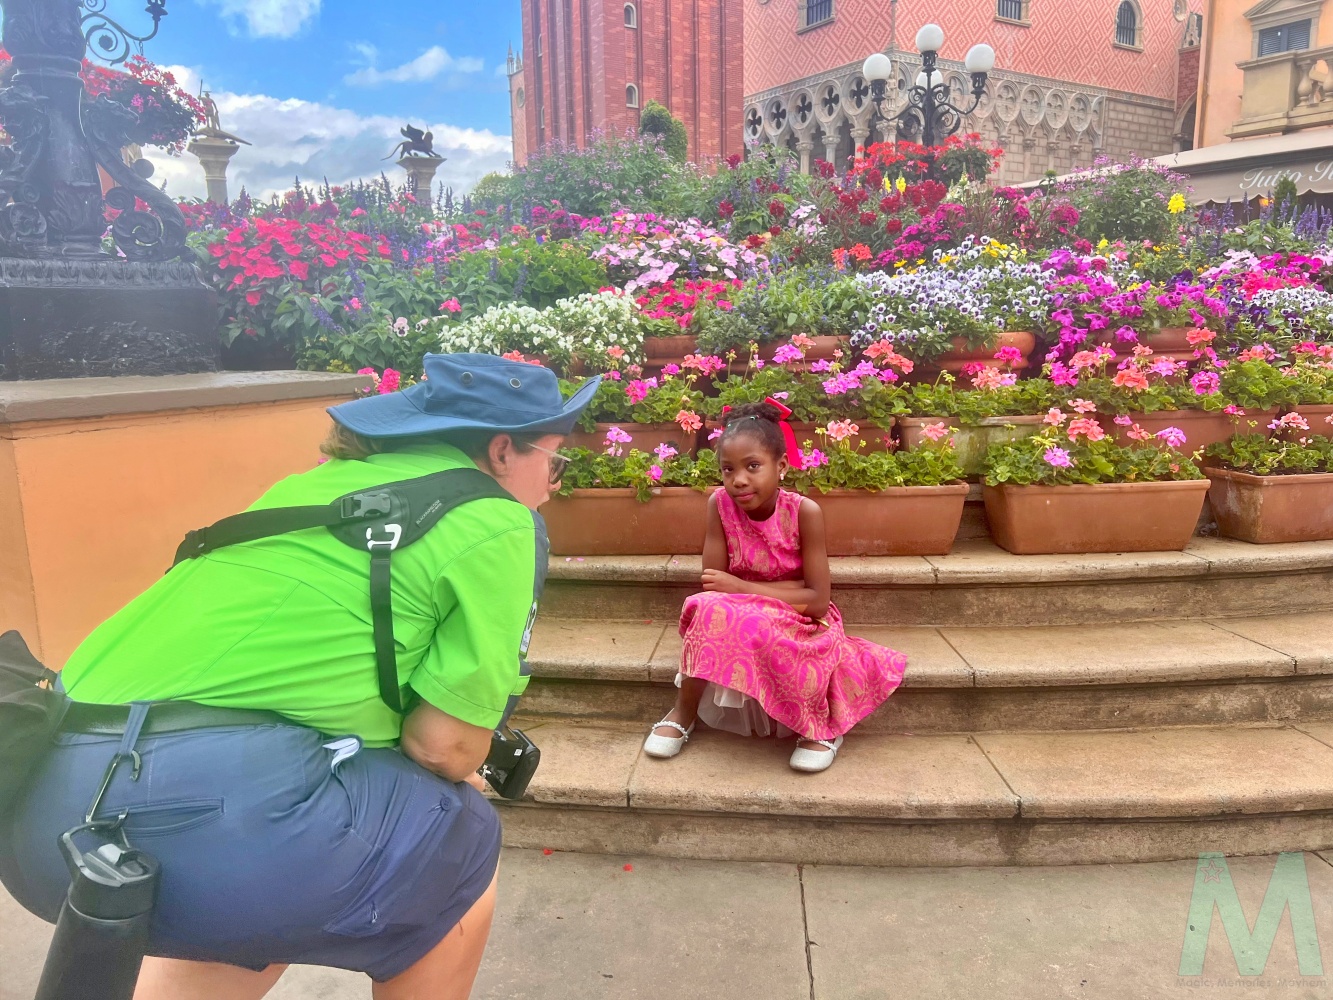 Capture Your Moment Epcot with Magic, Memories, Mayhem